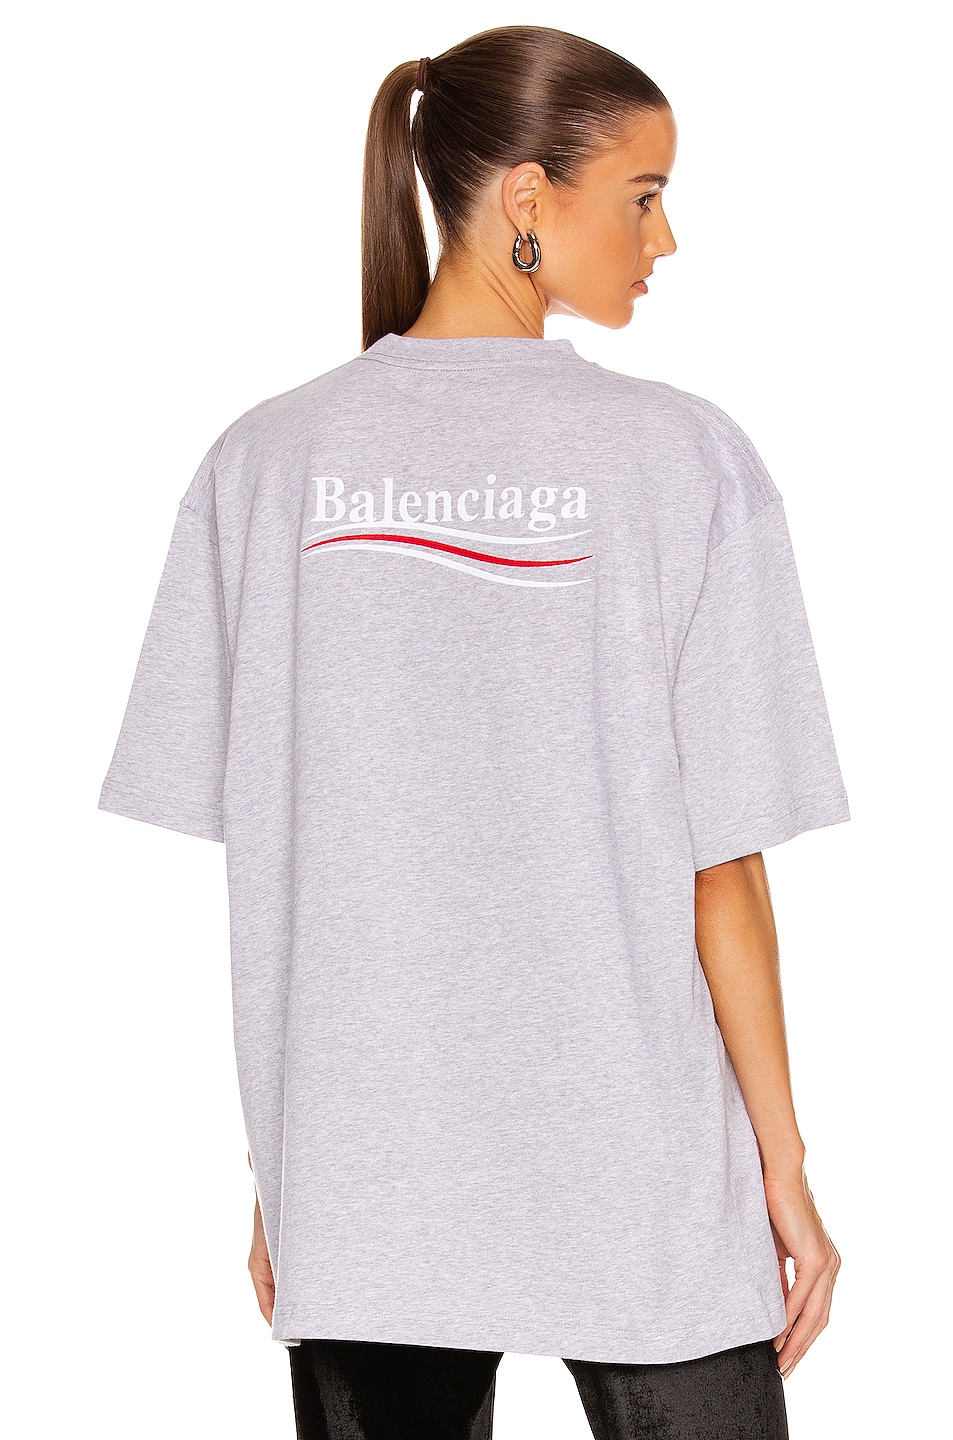 Image 1 of Balenciaga Political Campaign Large Fit T-Shirt in Heather Grey & White & Red